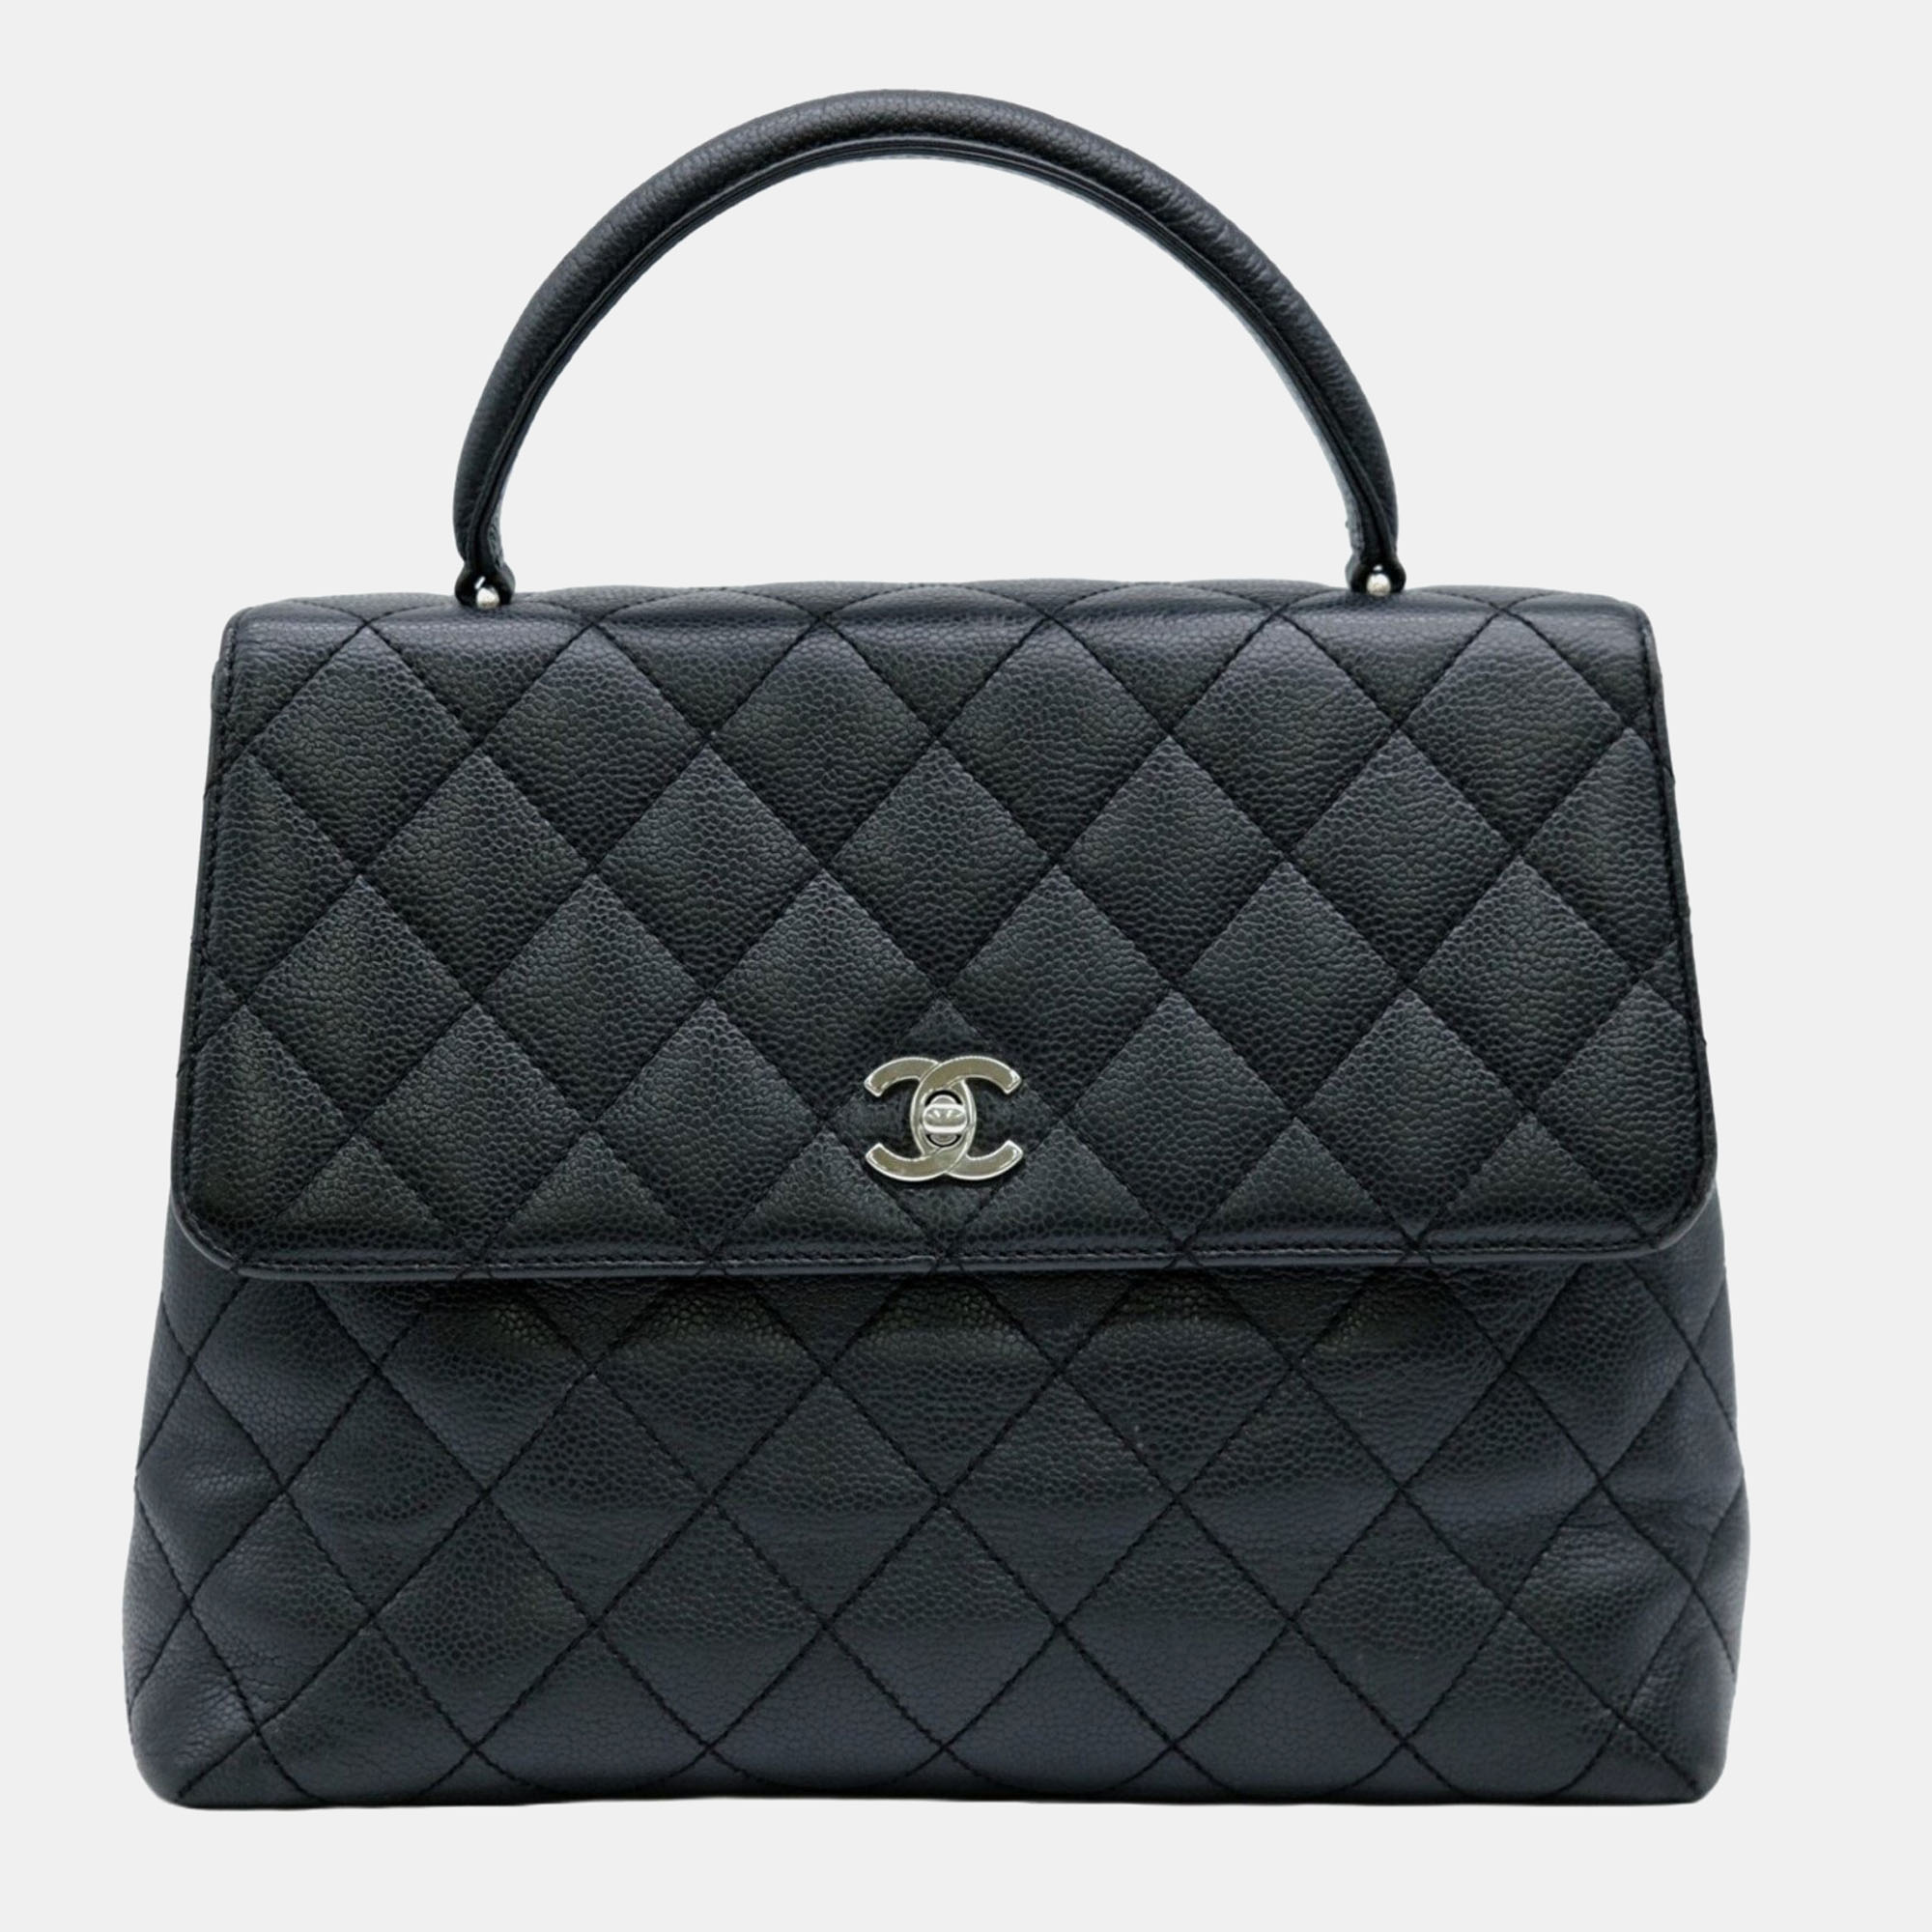 Chanel black leather  kelly top handle bag